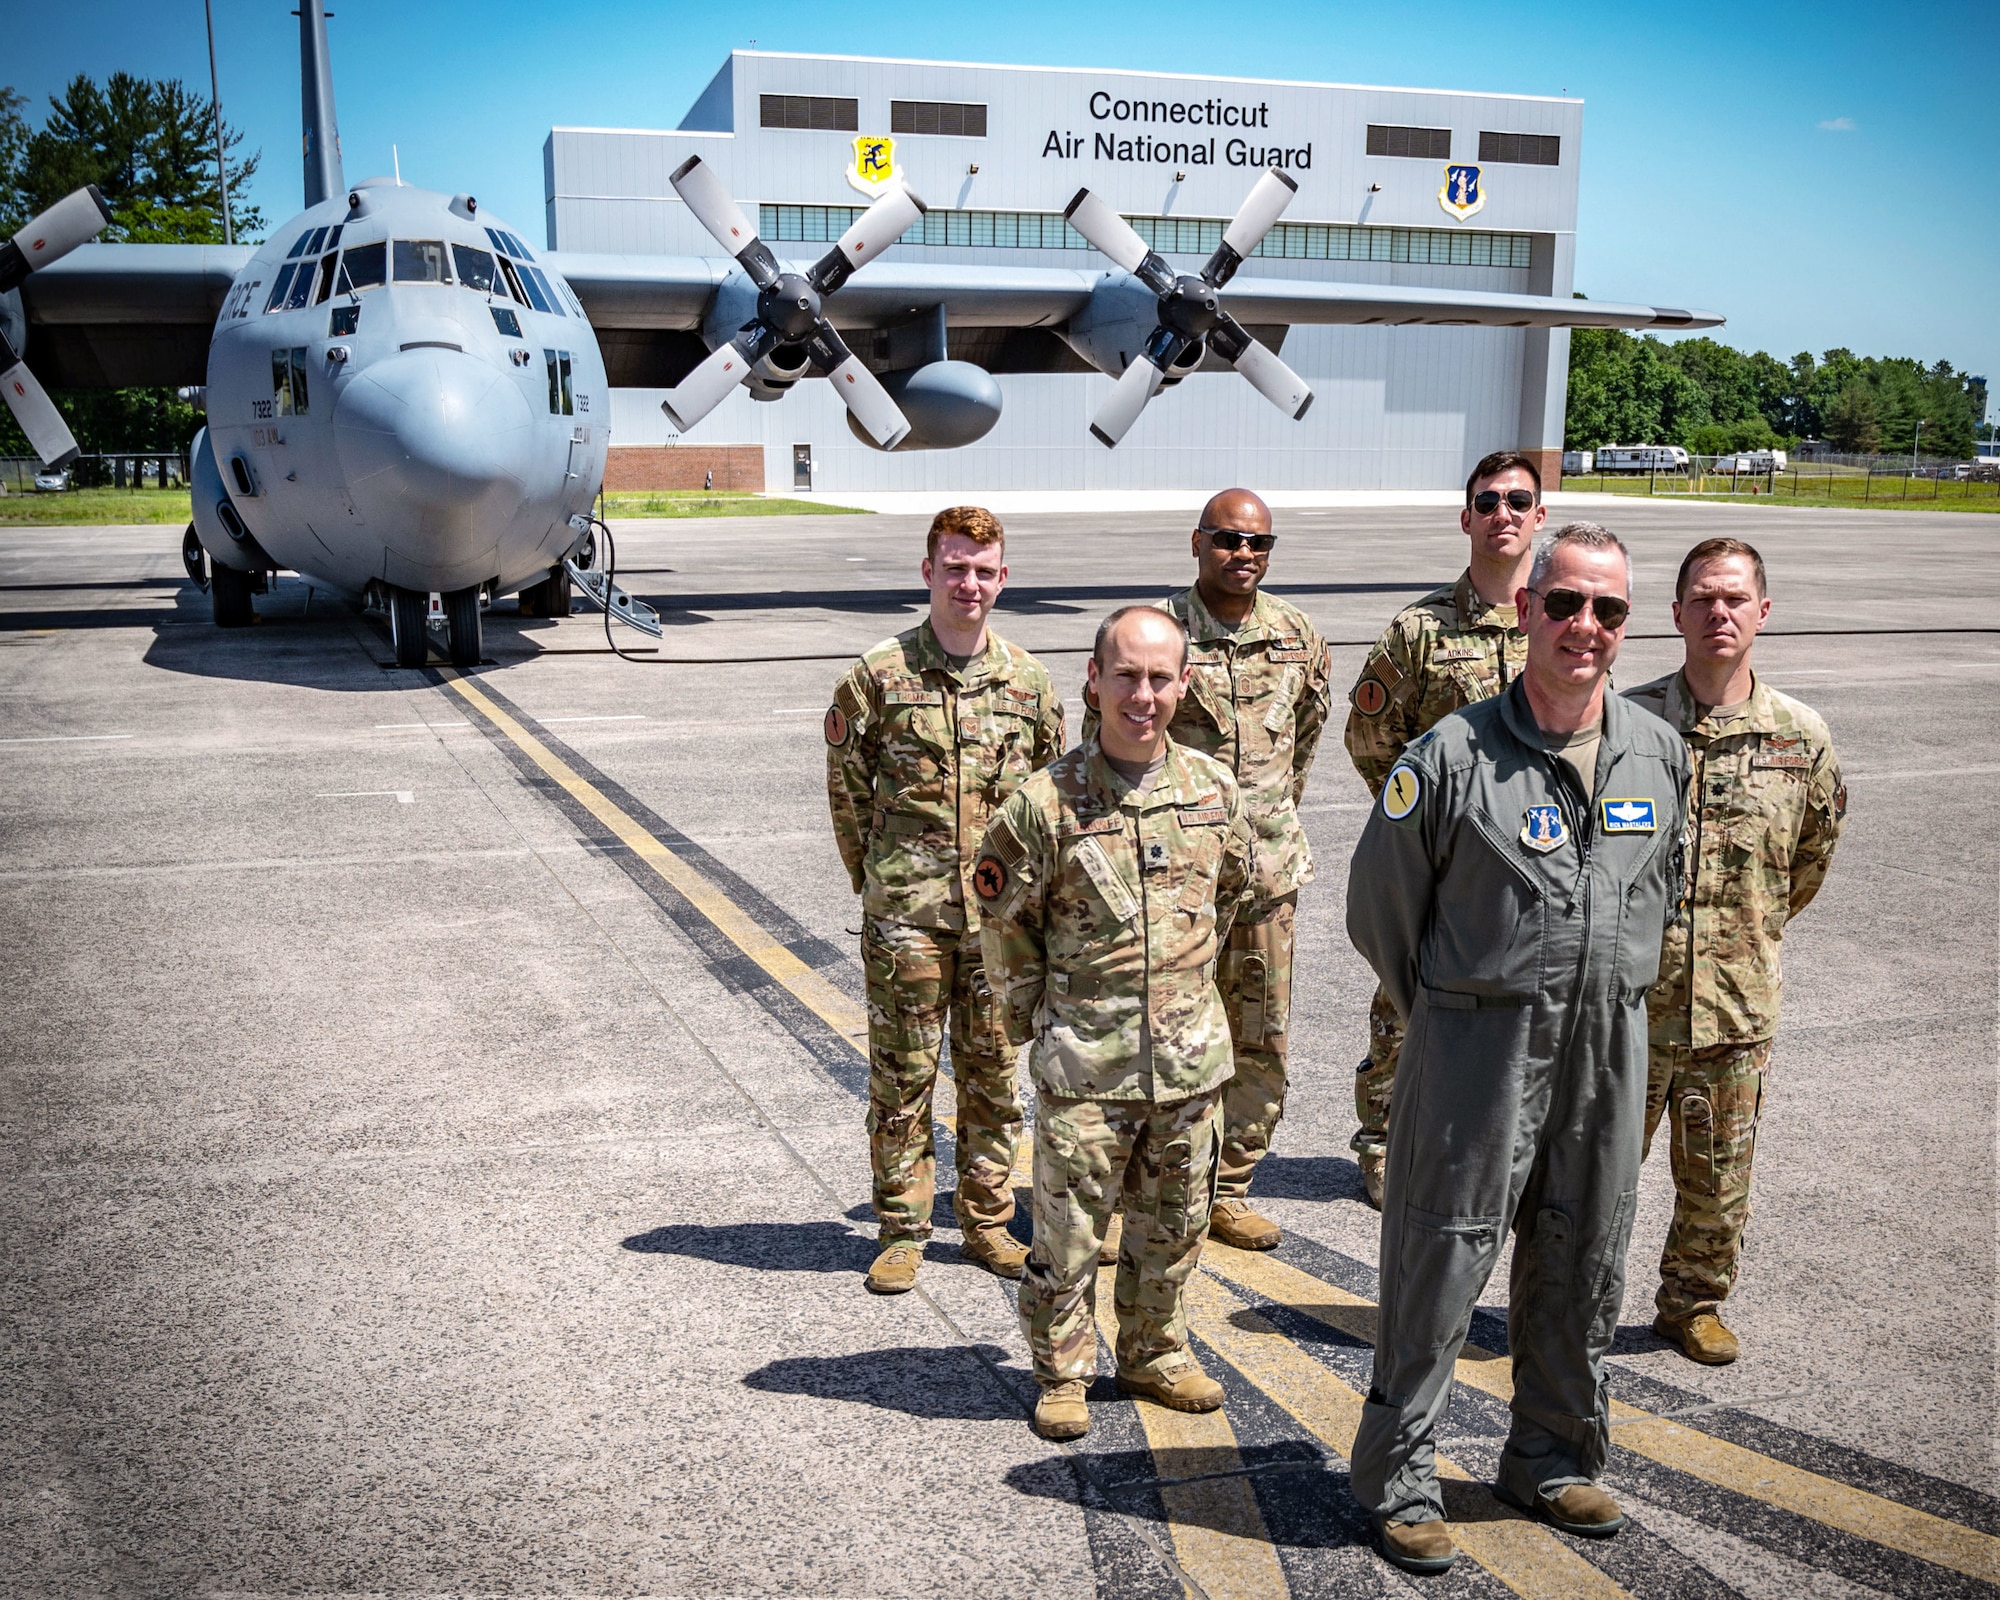 Air Force Lt. Col. Richard Paul Mastalerz II (front, center), a pilot assigned to the 103rd Airlift Wing, Connecticut Air National Guard, and members of his aircrew, prepare to fly a C-130H aircraft, June 4, 2022 at Bradley Air National Guard Base, East Granby, Conn. The flight was Mastalerz’ first since being diagnosed with stage 3 colorectal cancer in 2020. (U.S. Air Force photo by Master Sgt. Tamara R. Dabney)